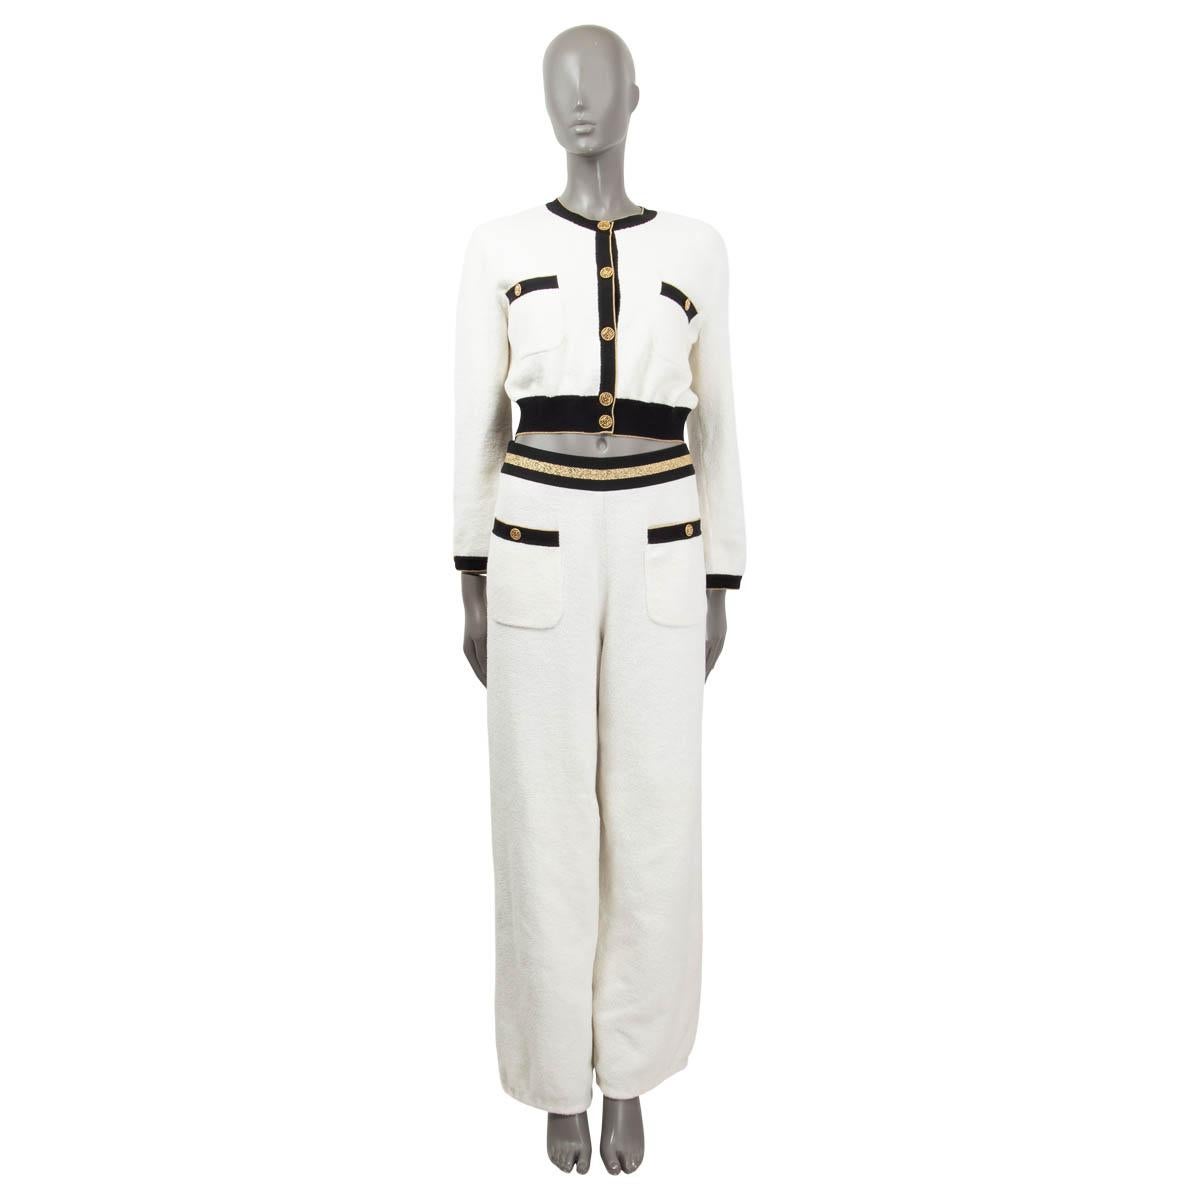 100% authentic Chanel cropped terrycloth knit cardigan in white cotton (83%) and polyamide (17%). The design features black elastic rib bands with a gold-tone lurex trim and two buttoned patch chest pockets. Embellished with gold-tone metal logo